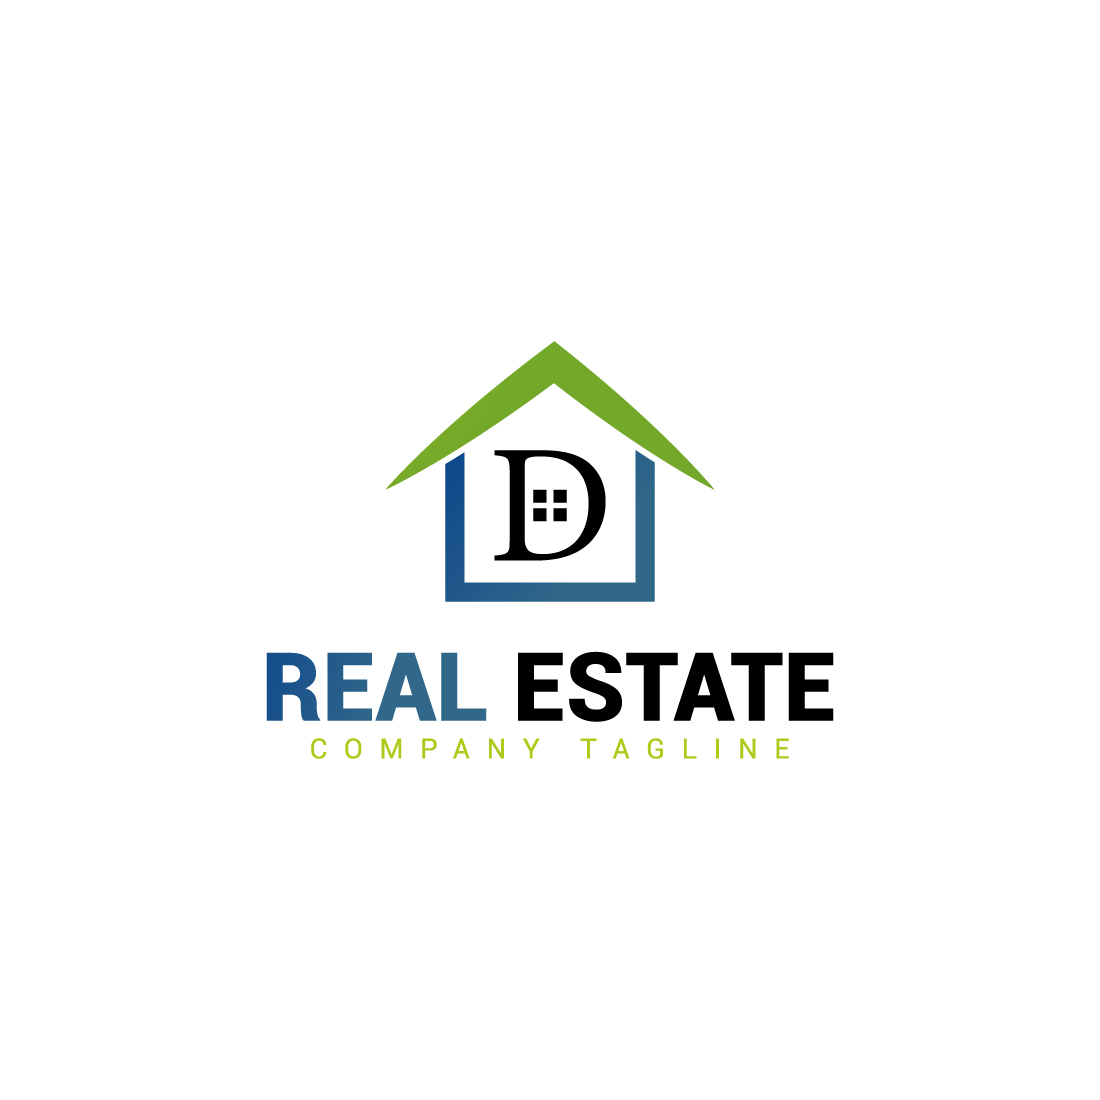 Real estate logo with green, dark blue color and D letter preview image.